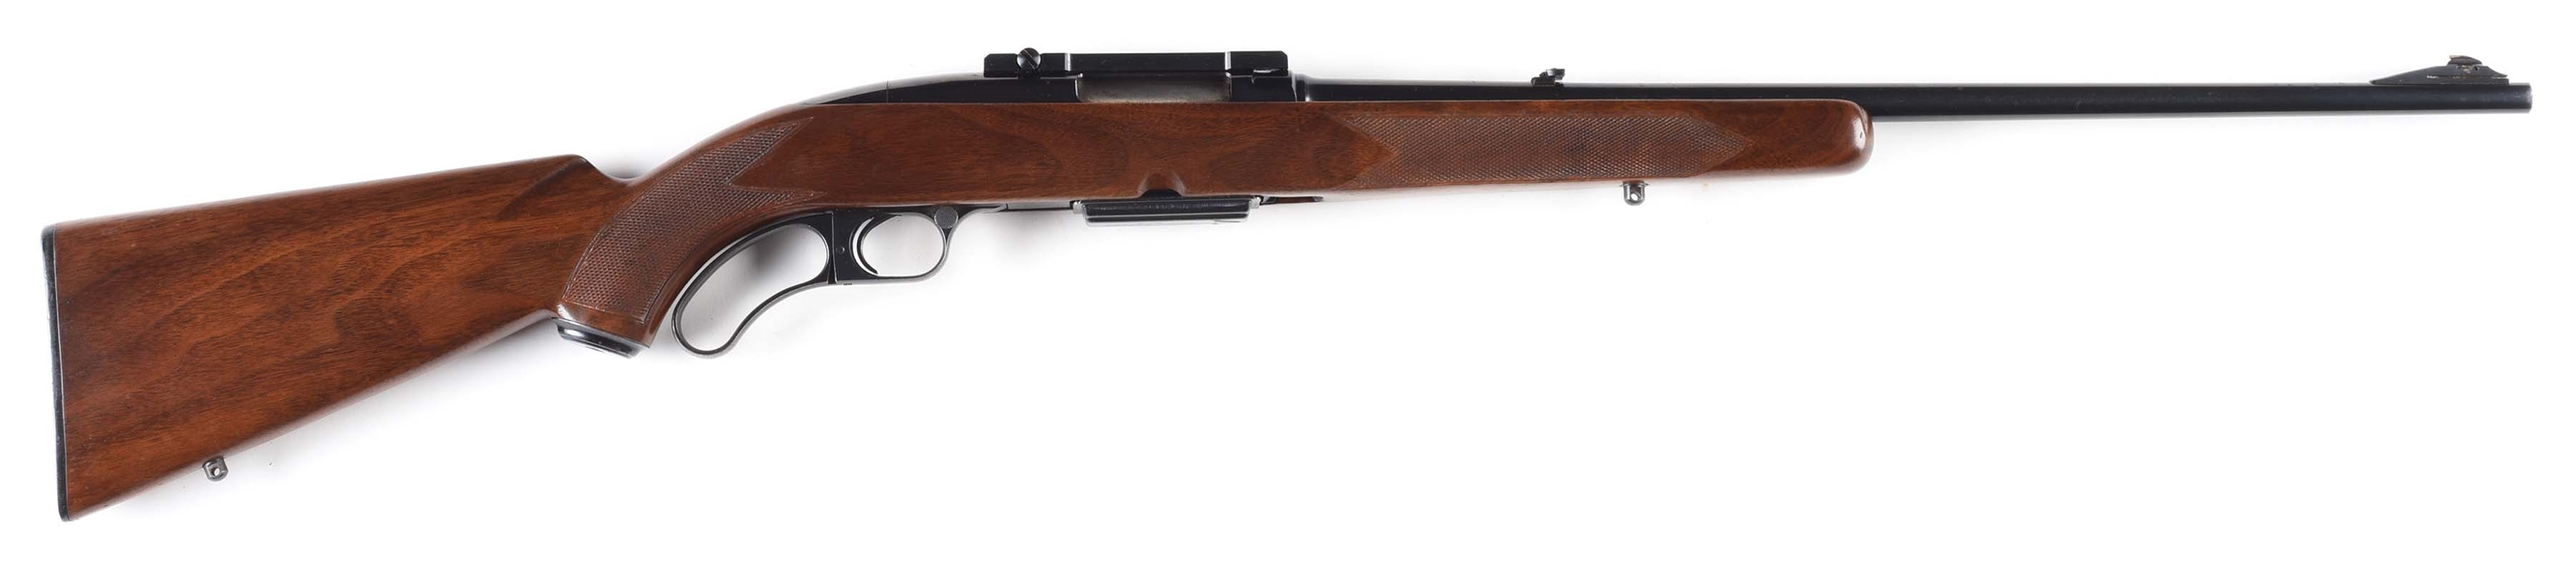 (C) WINCHESTER MODEL 88 LEVER-ACTION RIFLE.